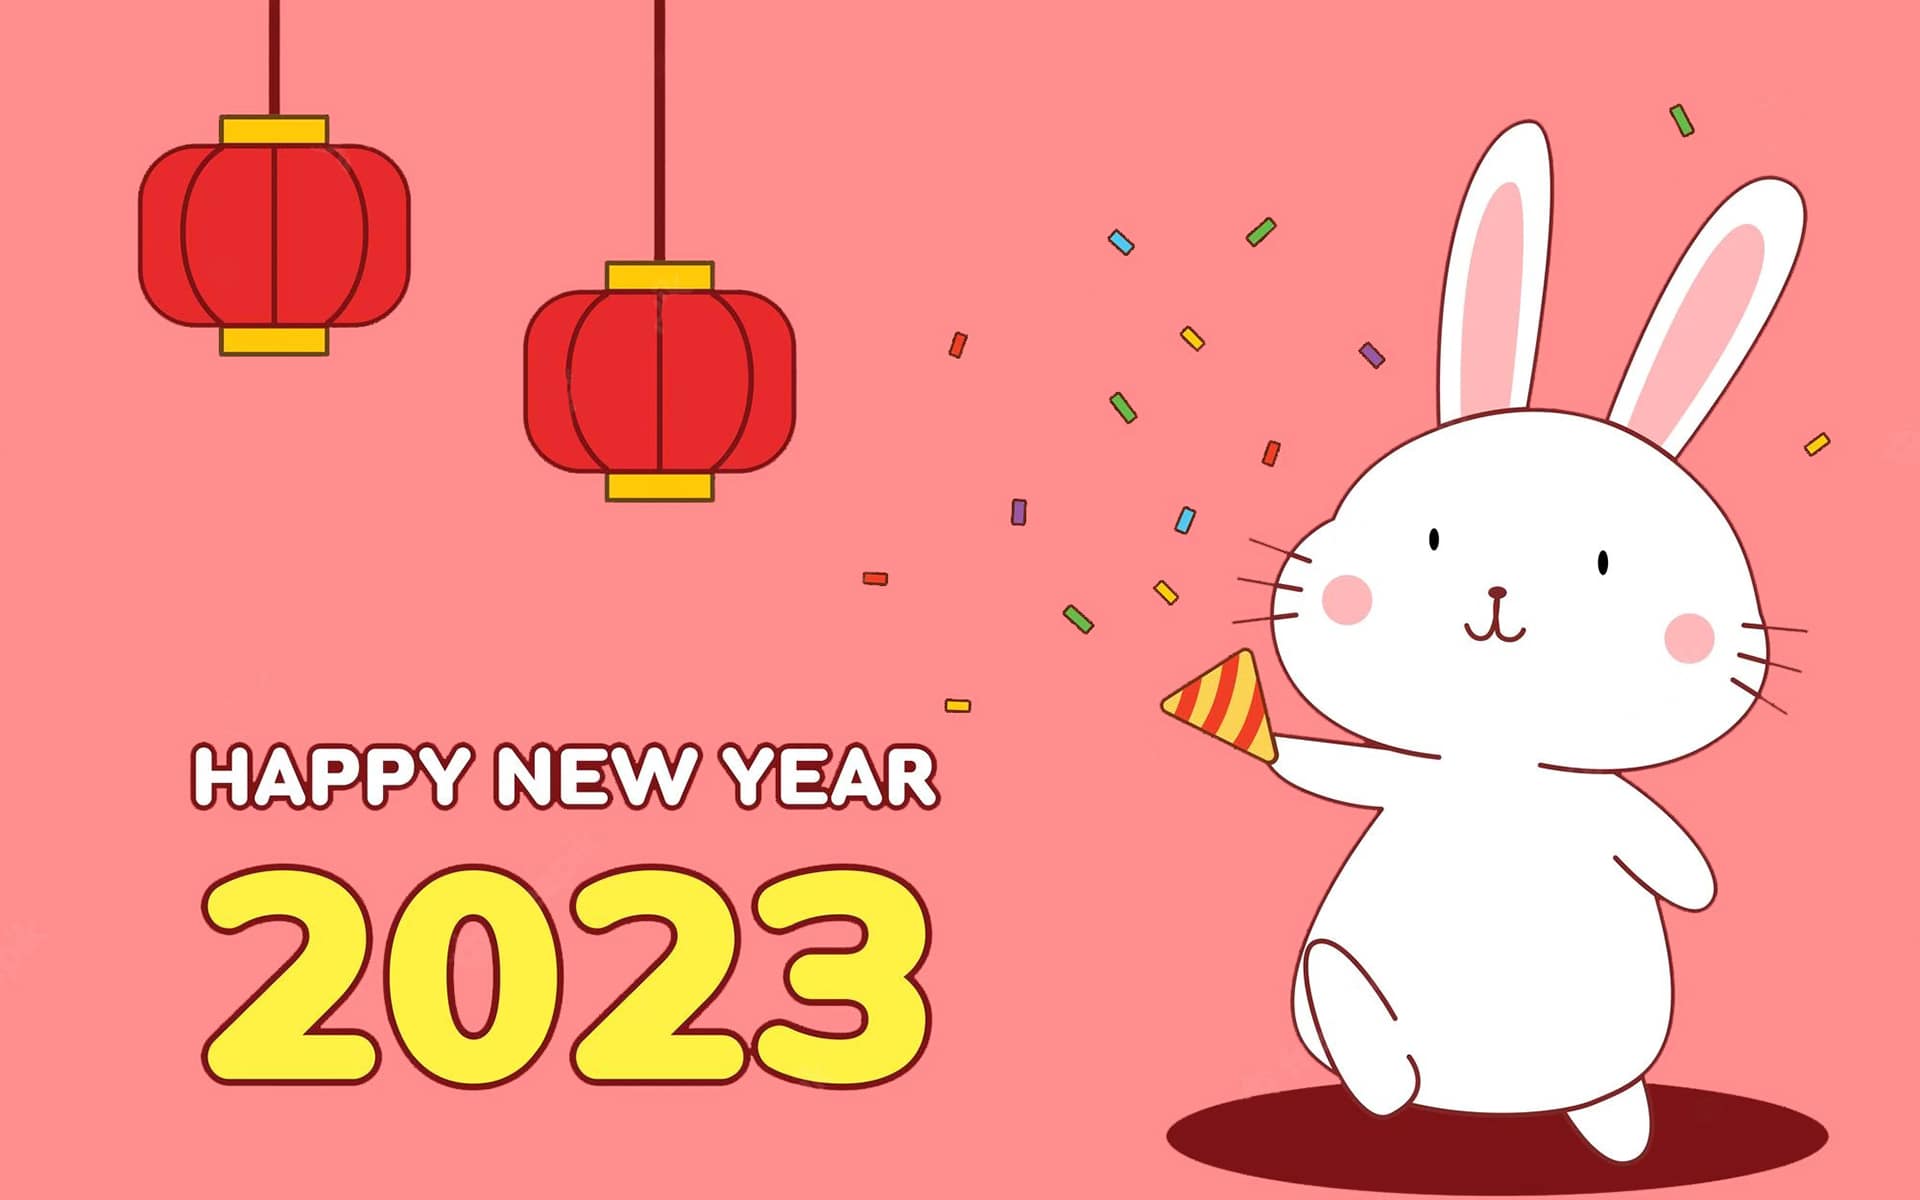 Lunar New Year 2023 Wallpapers